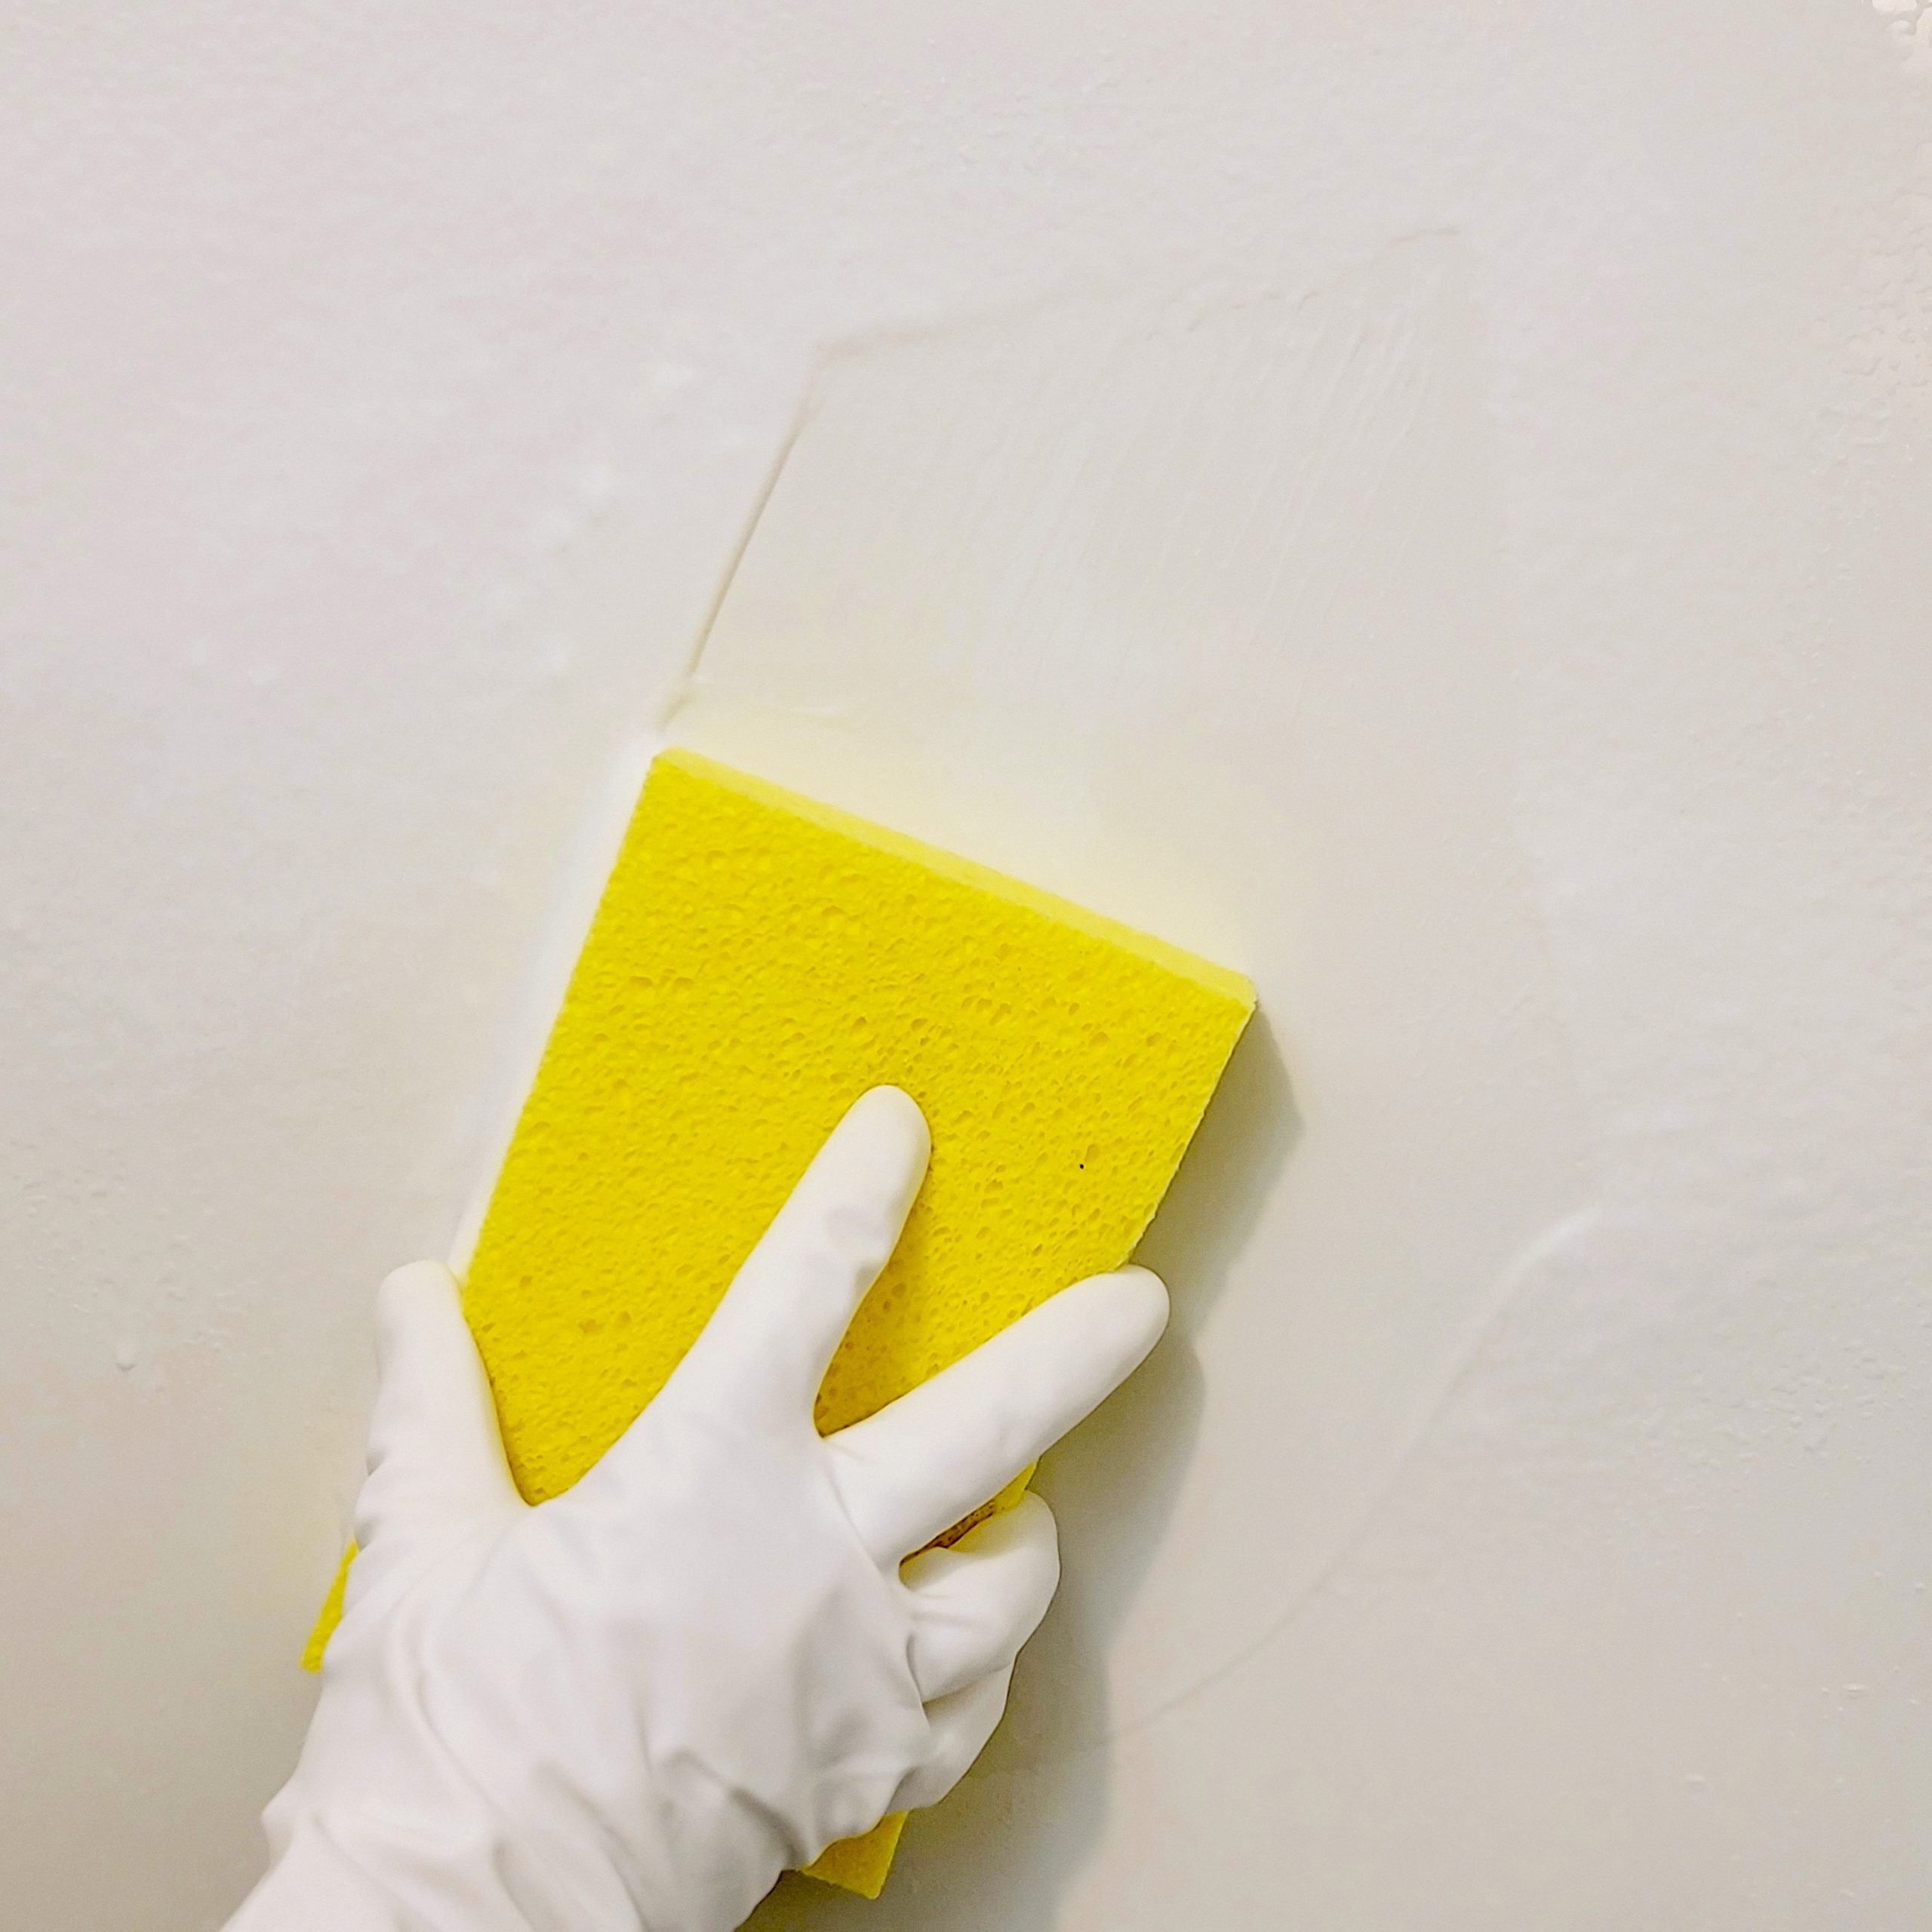 cleaning the shower walls with a yellow sponge